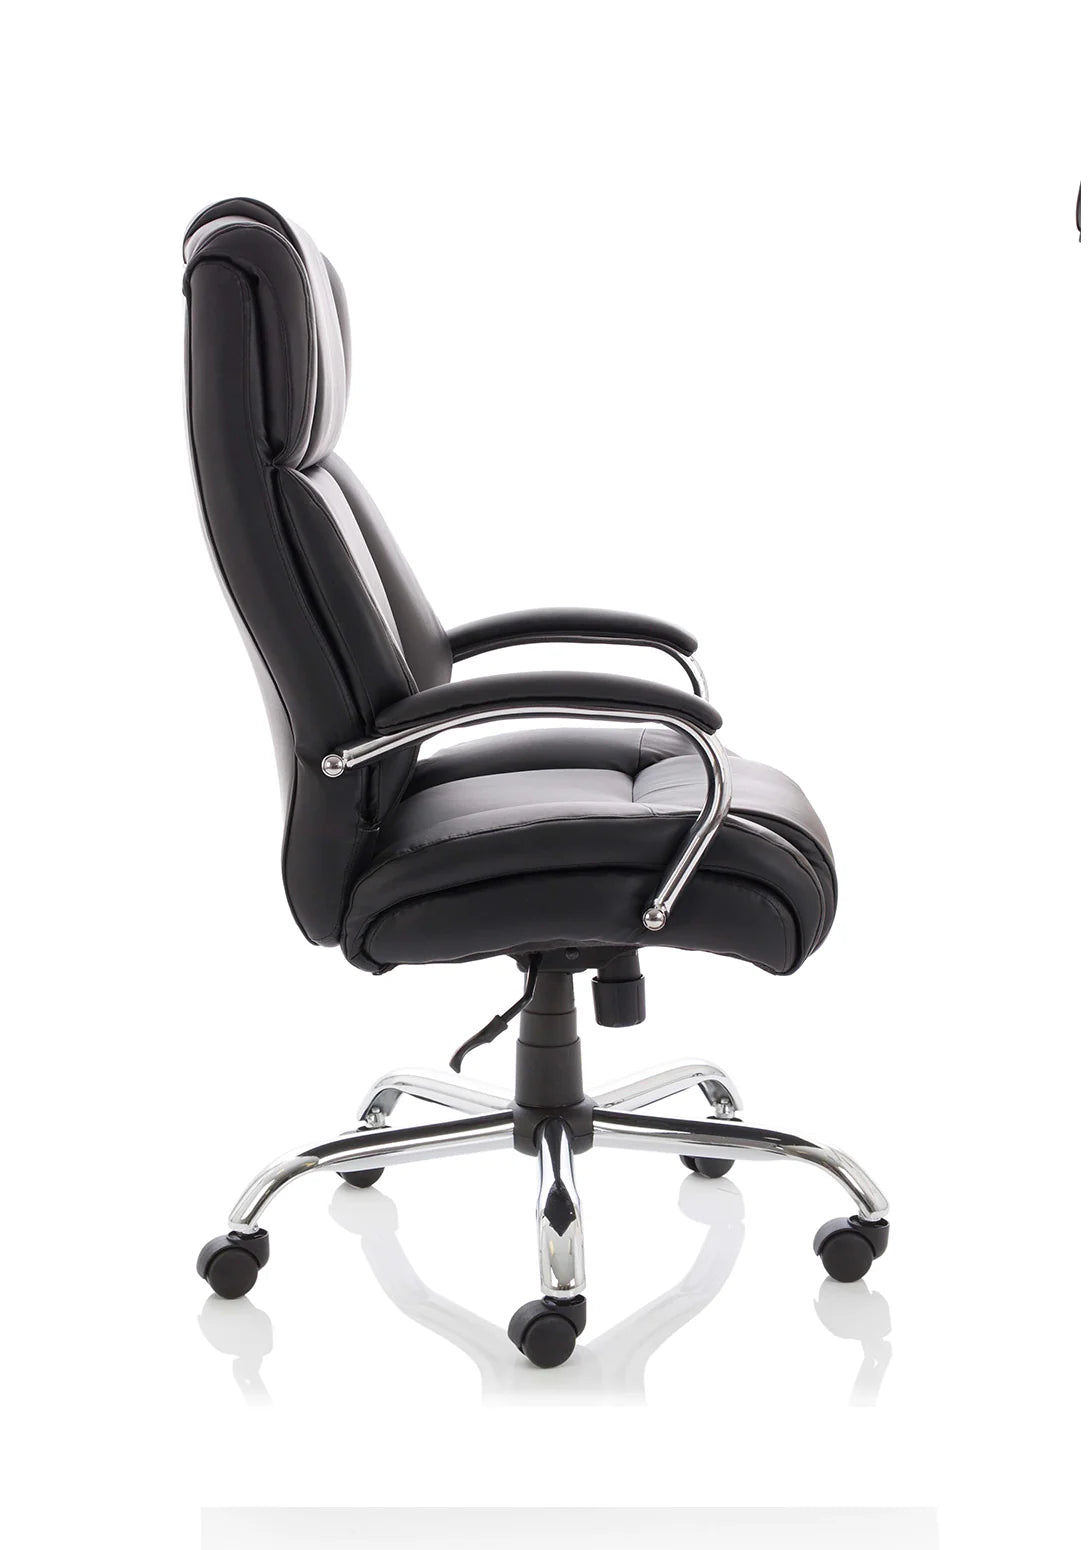 Texas High Back Heavy Duty Executive Black Leather Office Chair with Arms